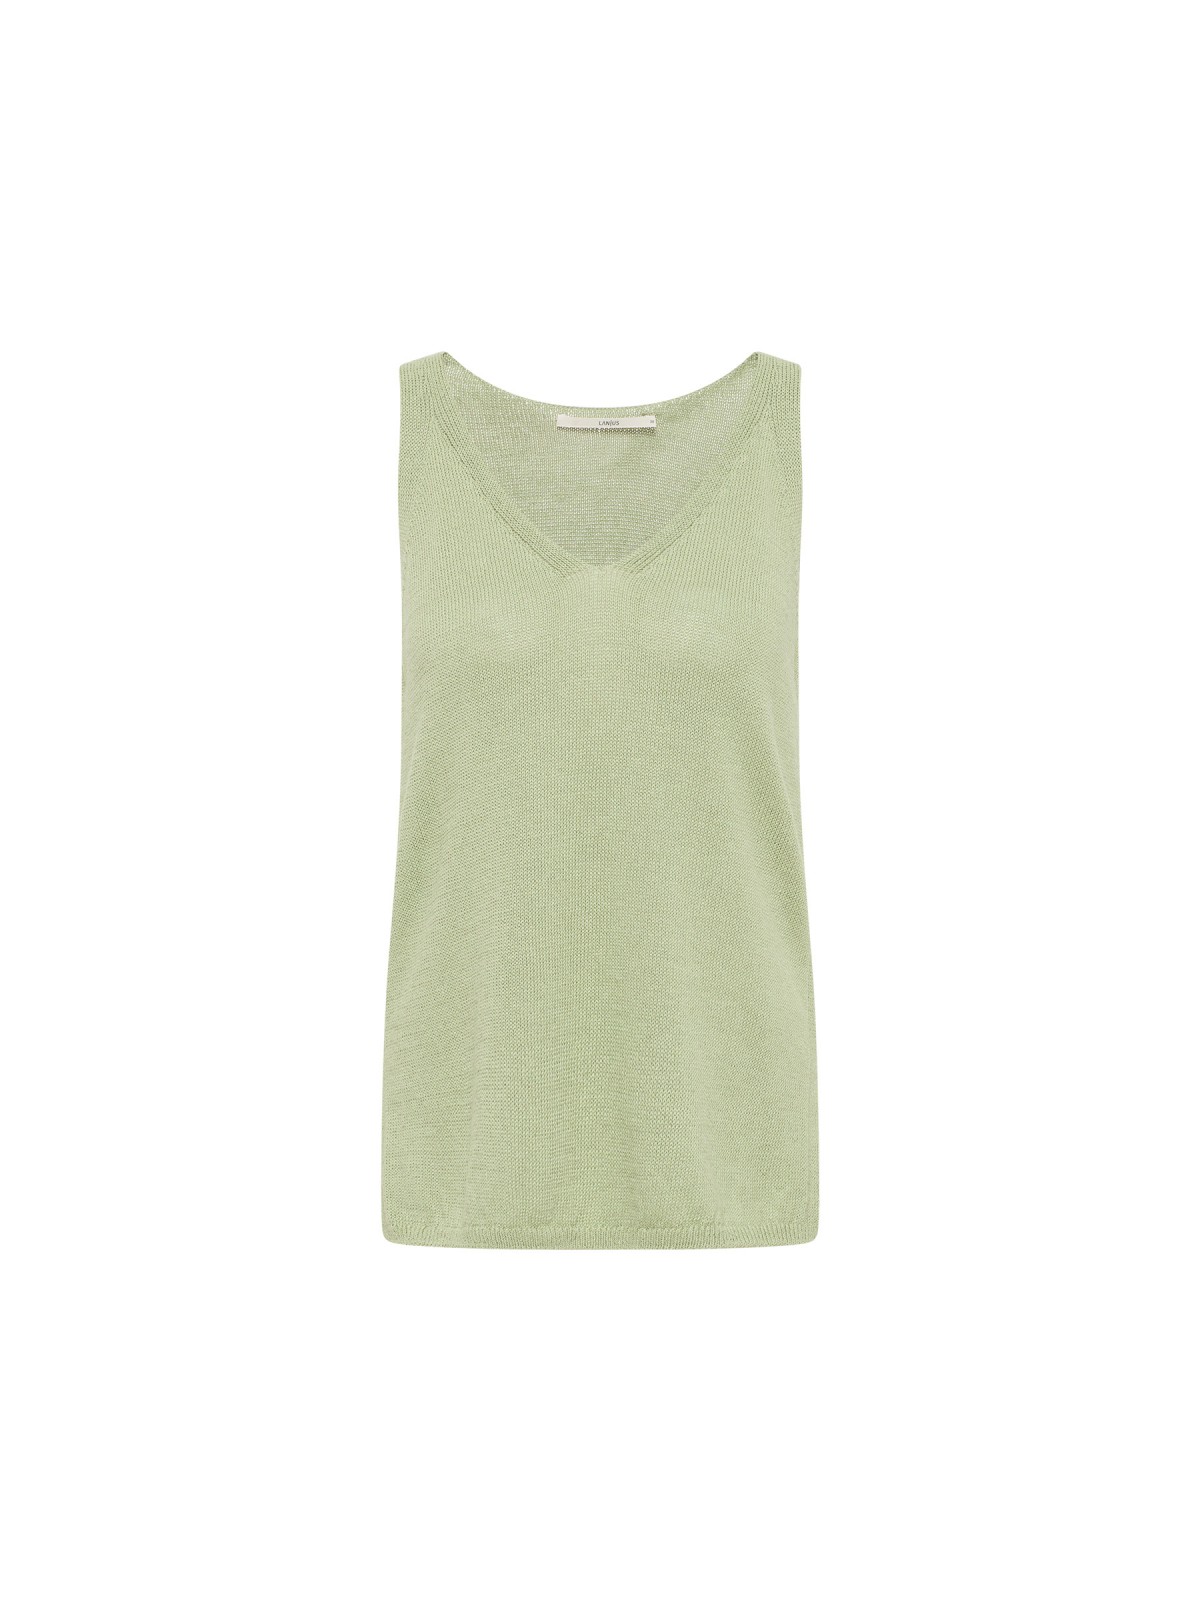 Knitted top made from organic cotton & linen - wasabi